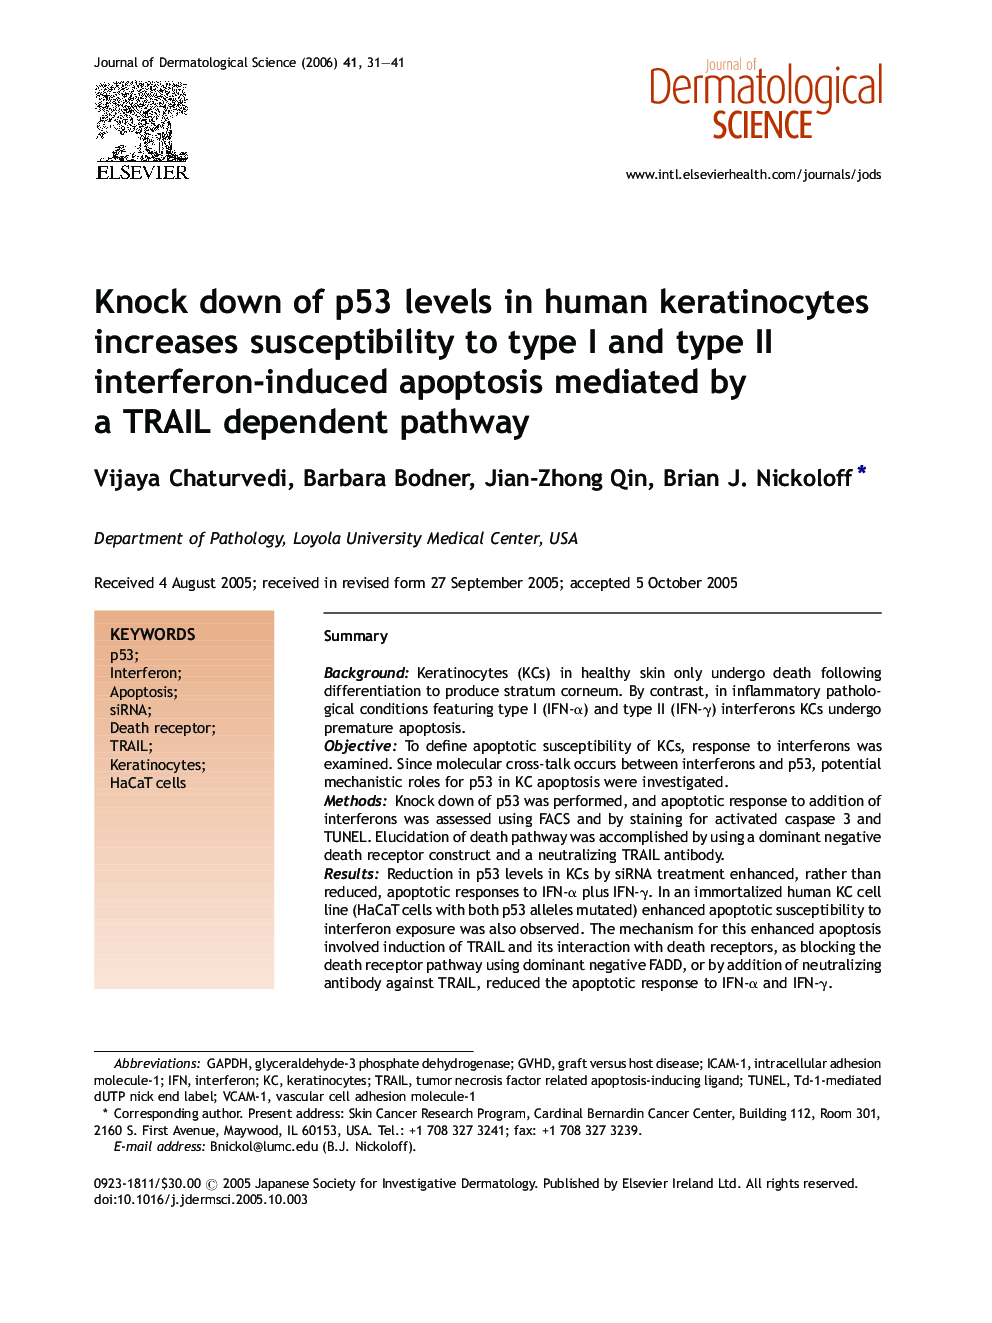 Knock down of p53 levels in human keratinocytes increases susceptibility to type I and type II interferon-induced apoptosis mediated by a TRAIL dependent pathway